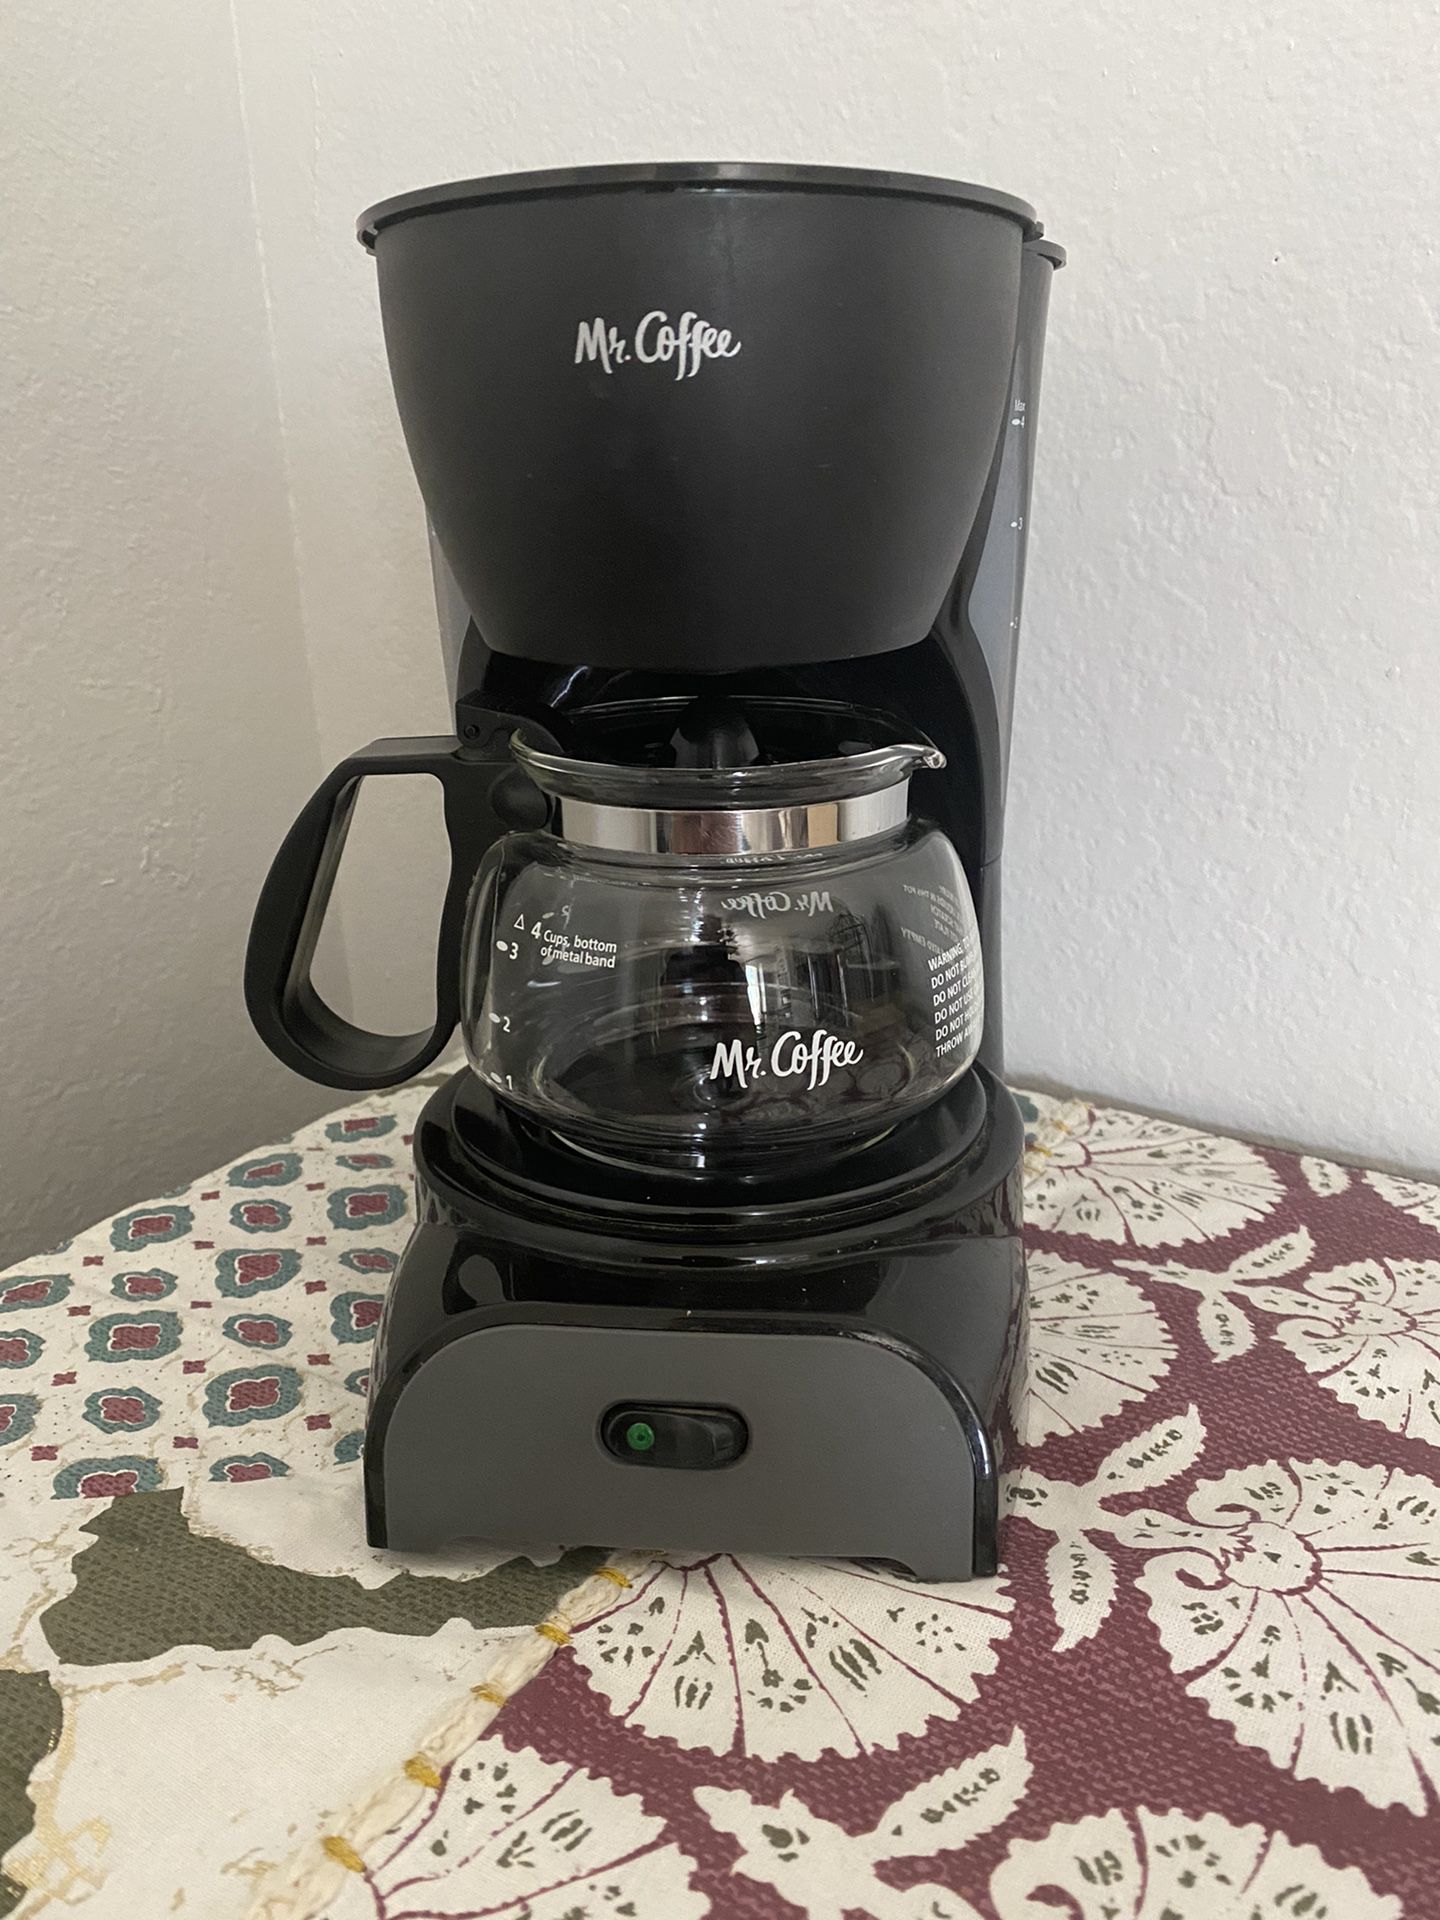 Mr. Coffee Coffee Maker - 4 Cups - Excellent Condition for Sale in